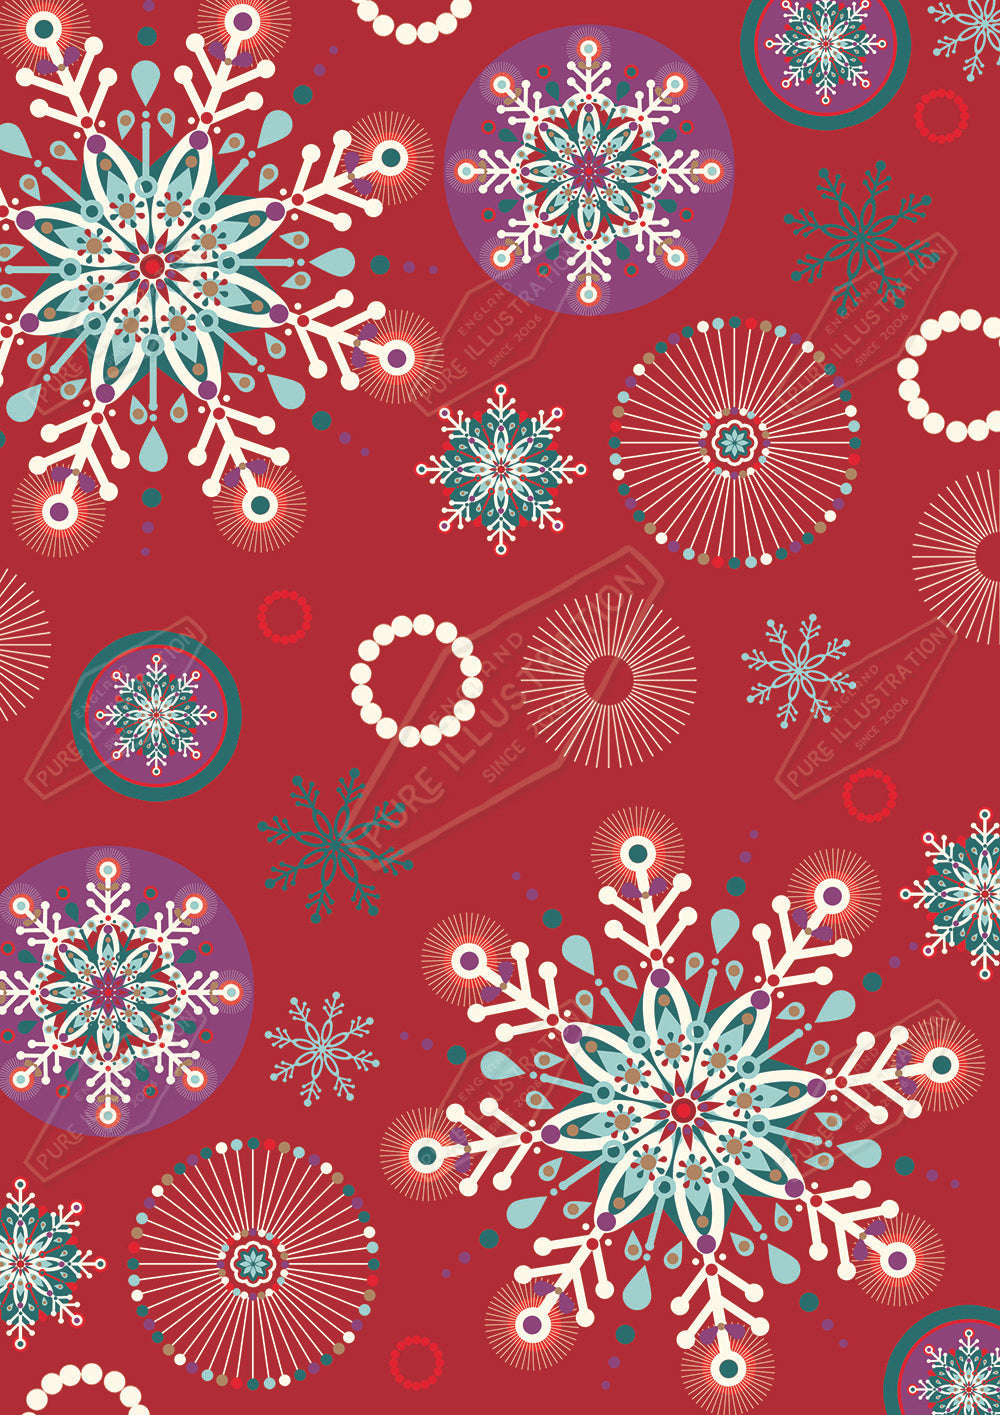 00030139KSP- Kerry Spurling is represented by Pure Art Licensing Agency - Christmas Pattern Design